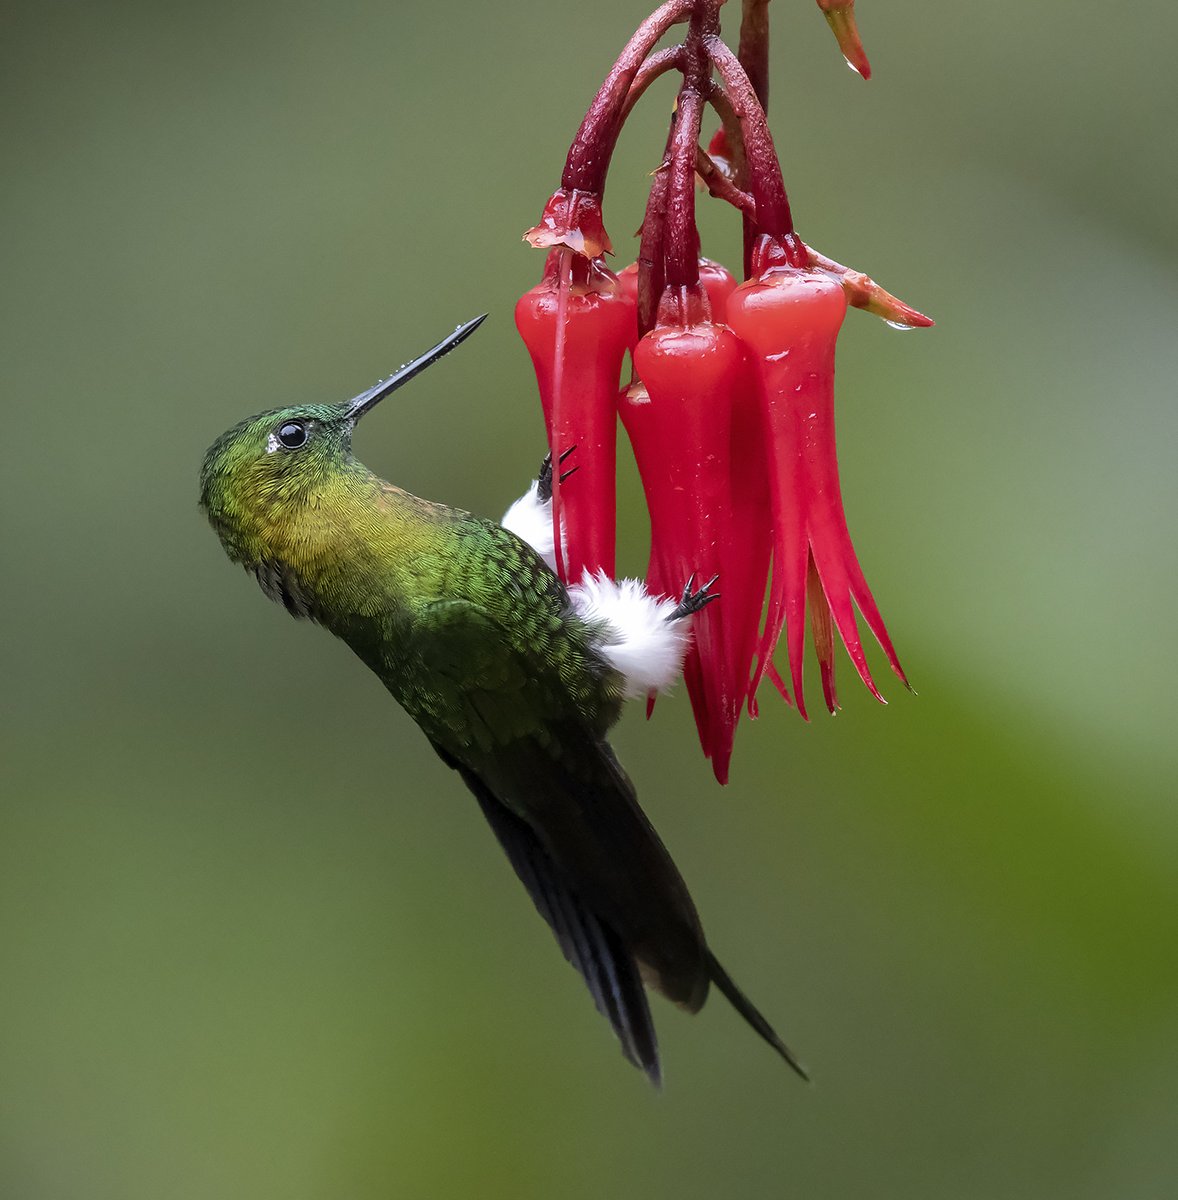 There are a bunch of hummingbirds called Pufflegs and I couldn't be happier about it. This is a golden-breasted puffleg.Both pics by Doug Greenberg (CC BY-NC 2.0)  https://www.flickr.com/photos/dagberg/ 